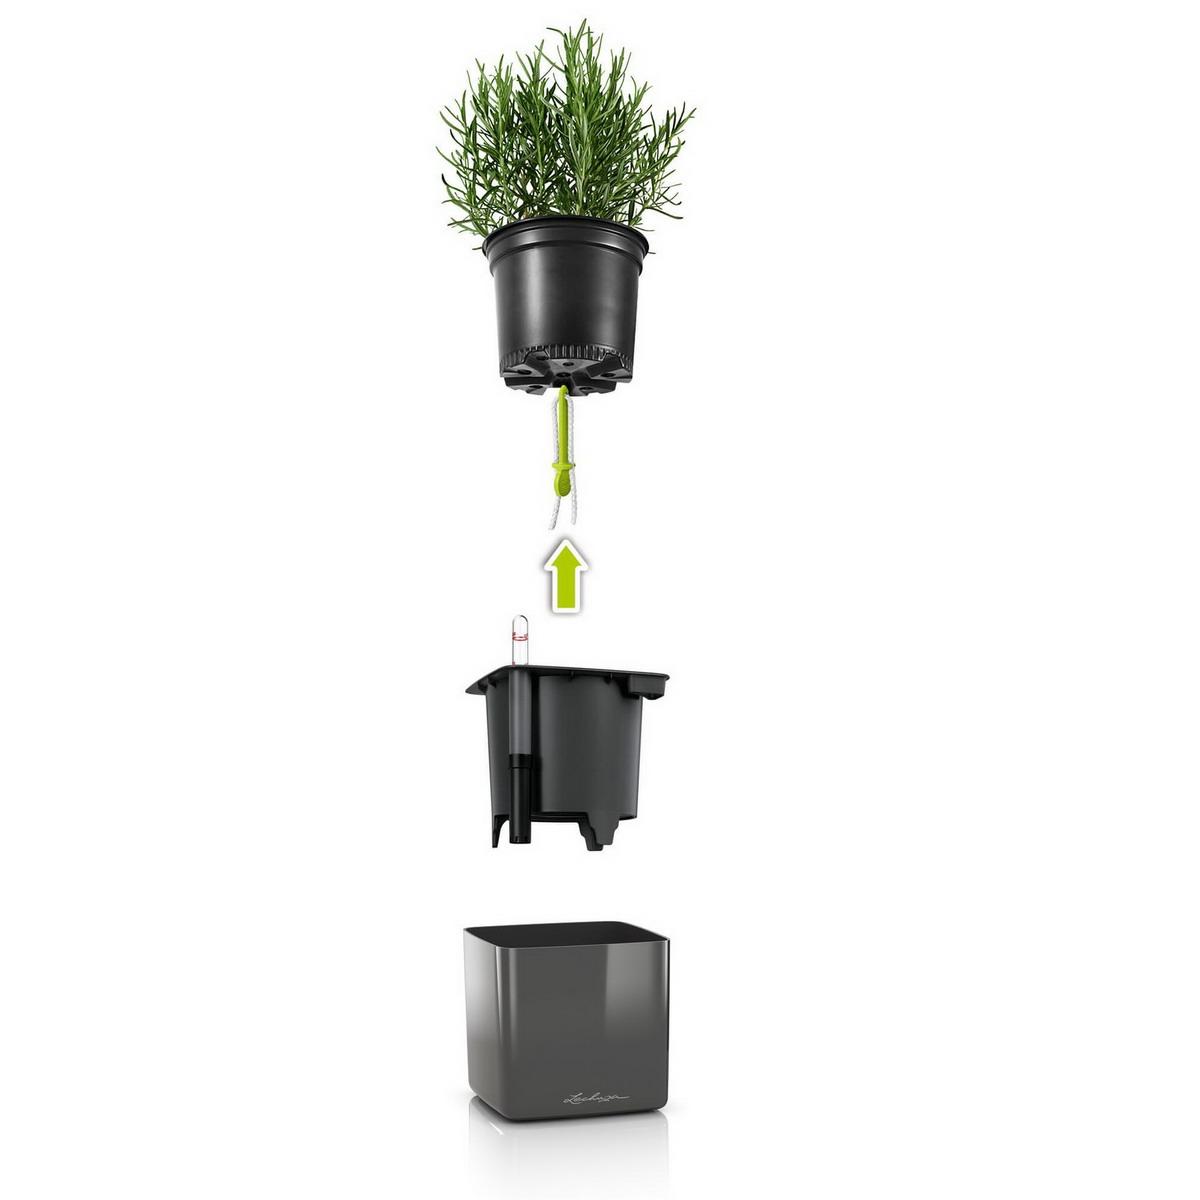 LECHUZA CUBE Glossy Triple Charcoal High Gloss Poly Resin Table Self-watering Planter with Water Level Indicator H14 L40 W14 cm, 5L - citiplants.com